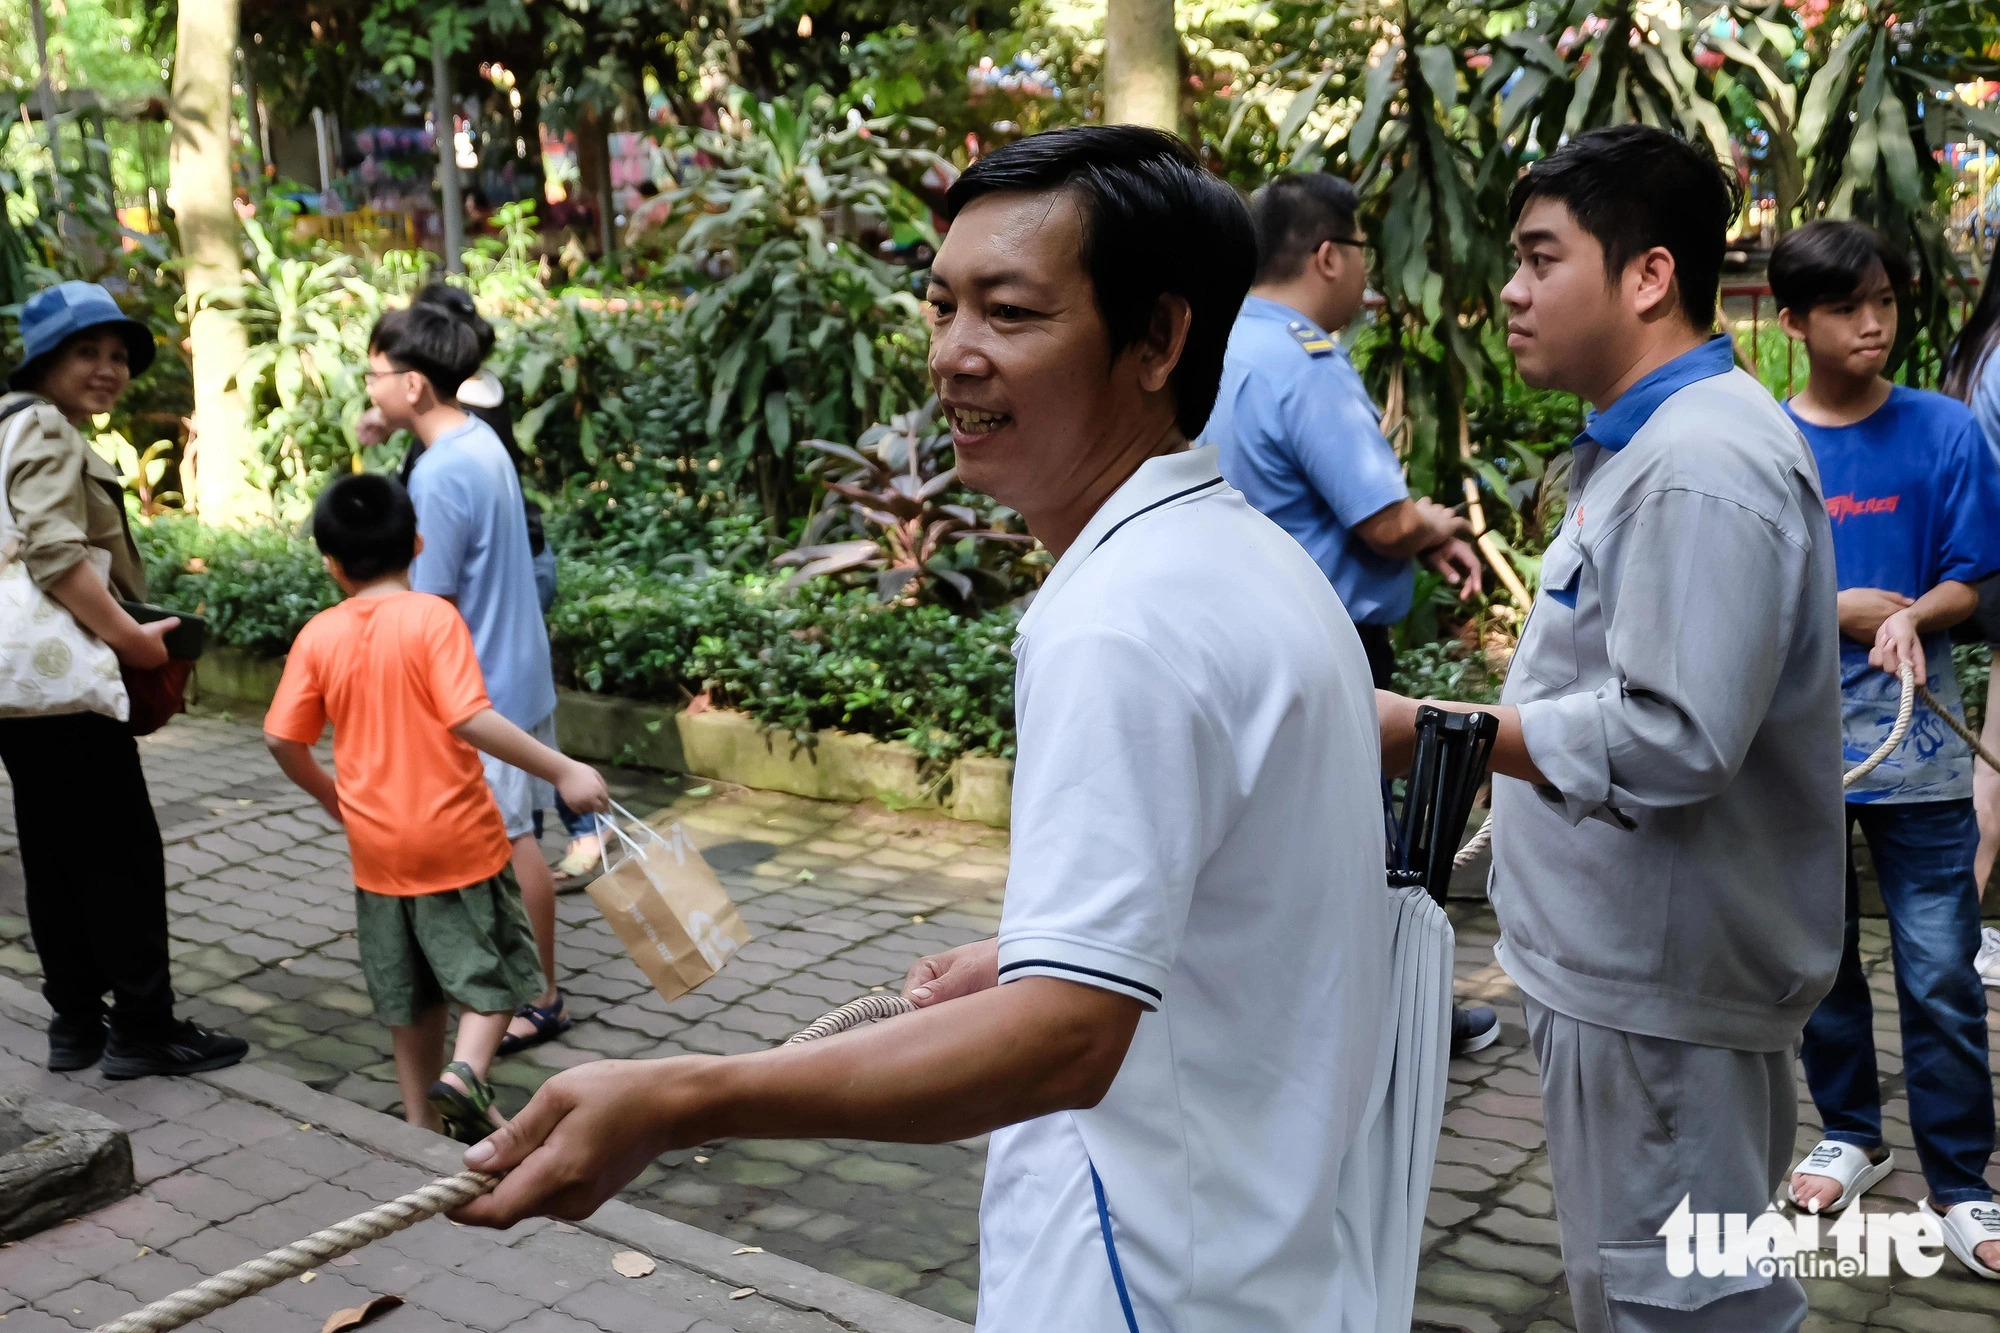 Tran Van Ti, a 41-year-old resident of Thu Duc City under the jurisdiction of Ho Chi Minh City, hailed the tiger as being sturdy and smart. Photo: Phuong Nhi / Tuoi Tre